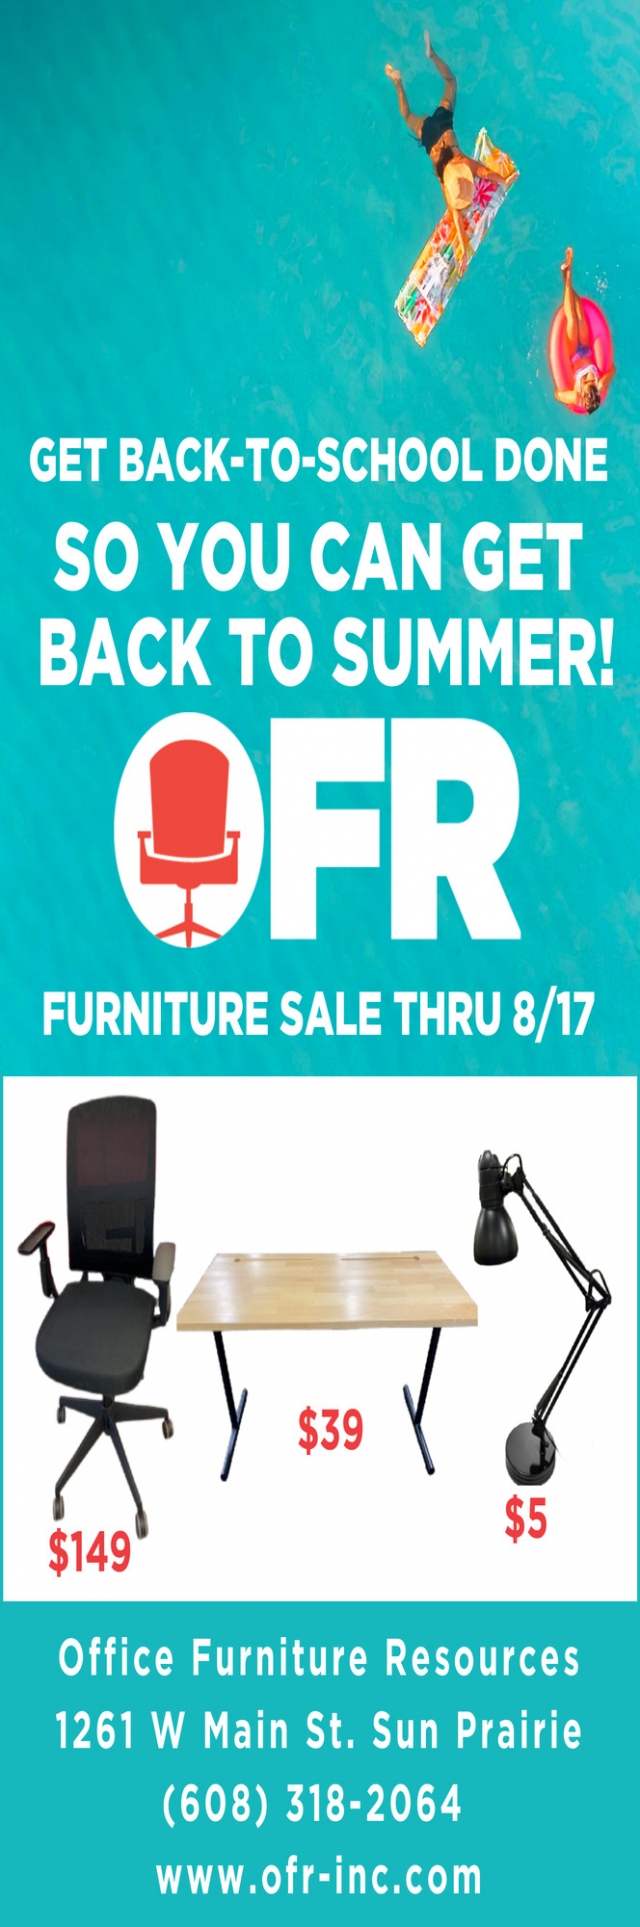 Get Back-To-School Done, Office Furniture Resources, Sun Prairie, WI